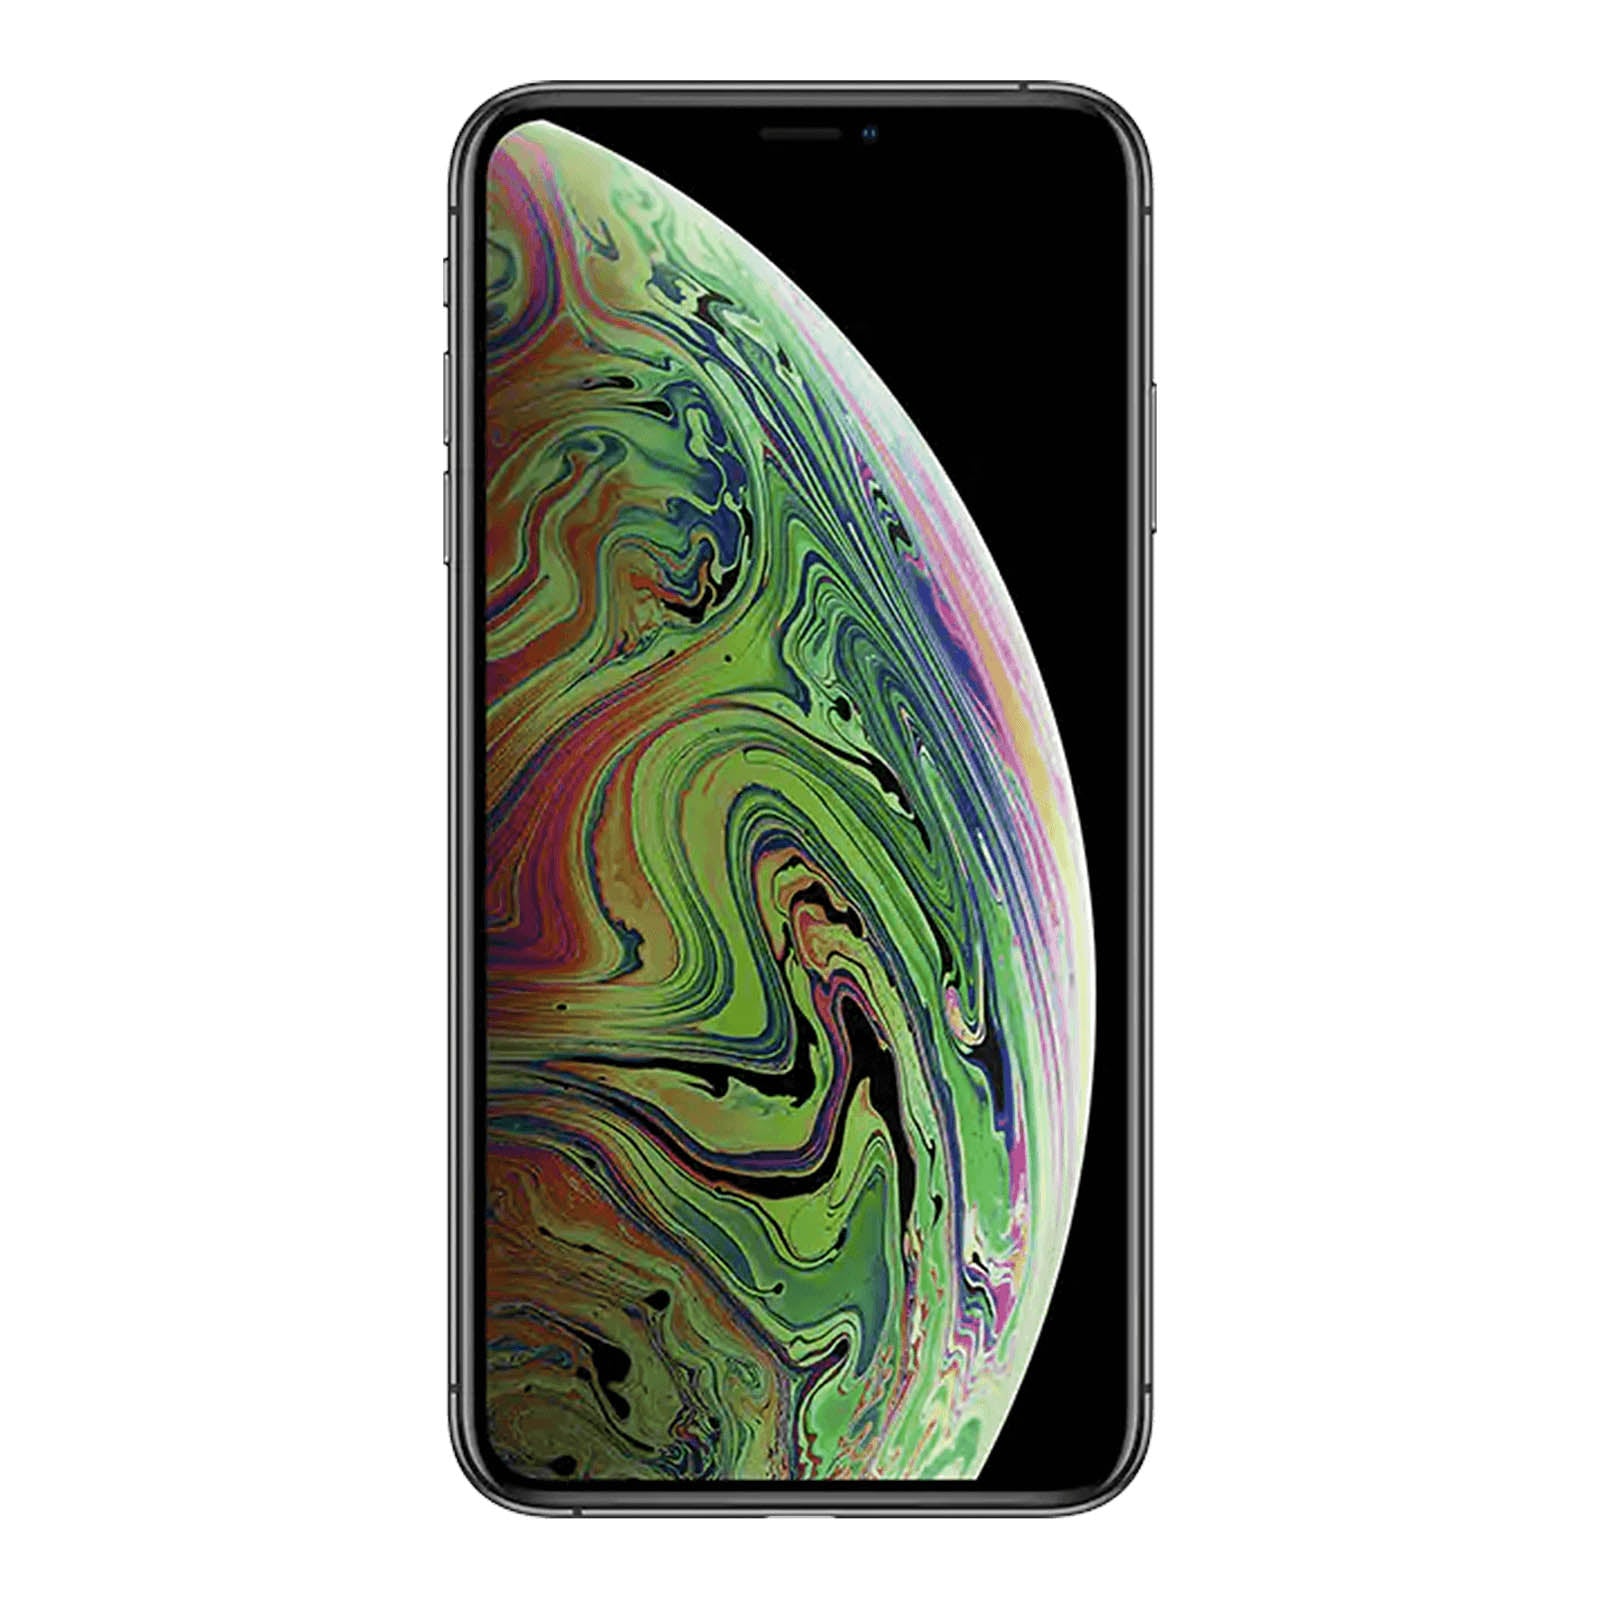 Apple iPhone XS 64GB Space Grey Very Good - AT&T